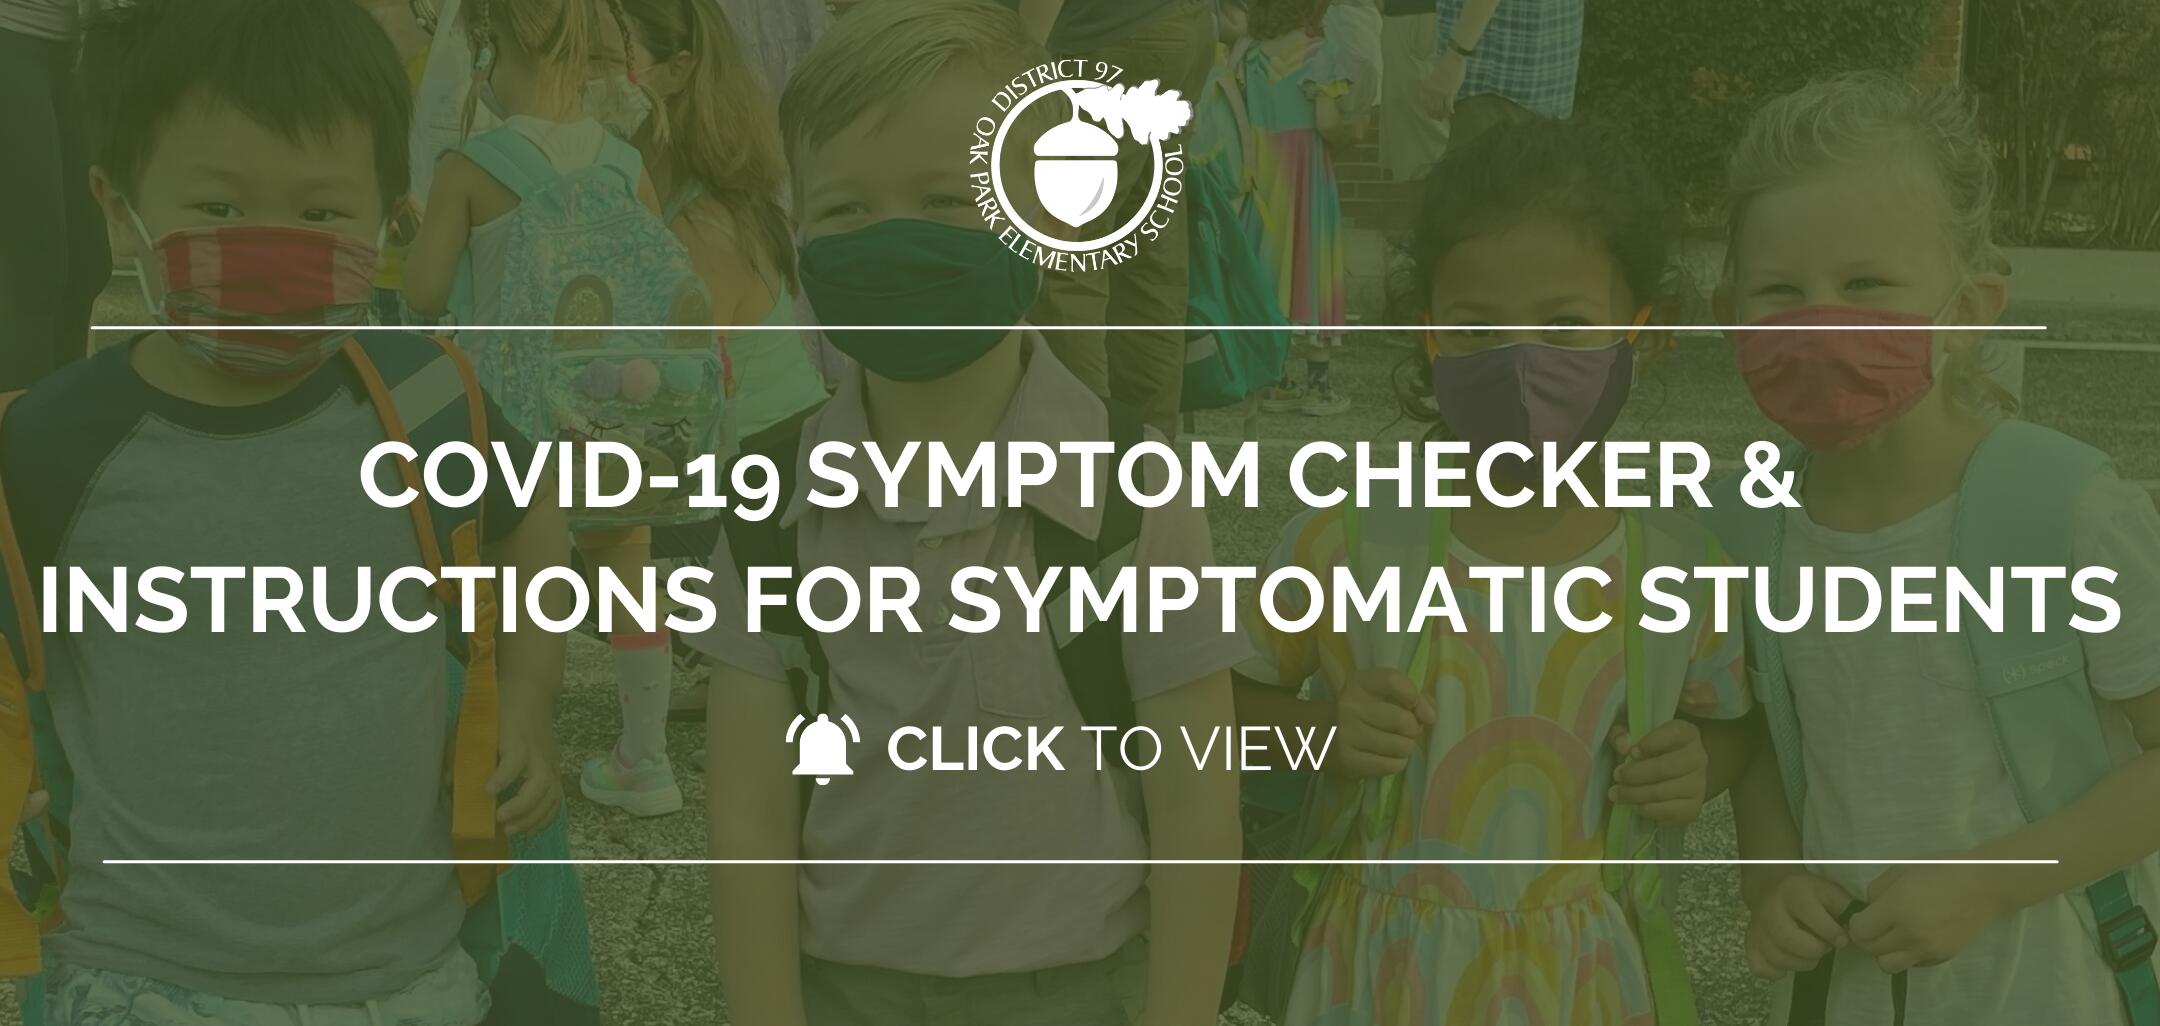 COVID-19 Symptom Checker and Instructions for Symptomatic Students